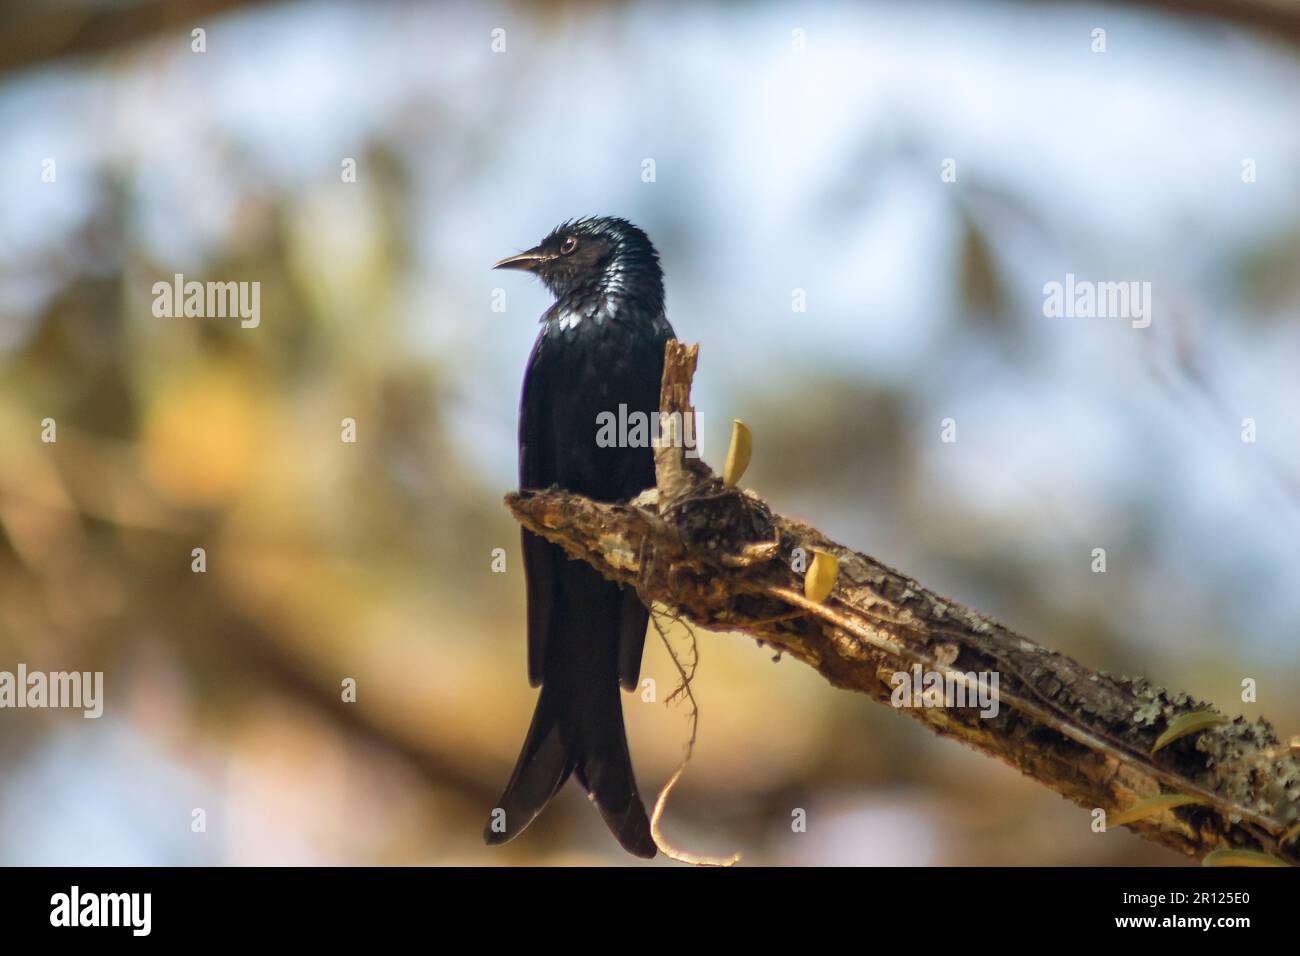 Black Drongo on a branch A small perching bird Black Drongo The hairs all over the body are black. The tip of the tail is pointed like a fish tail. Stock Photo